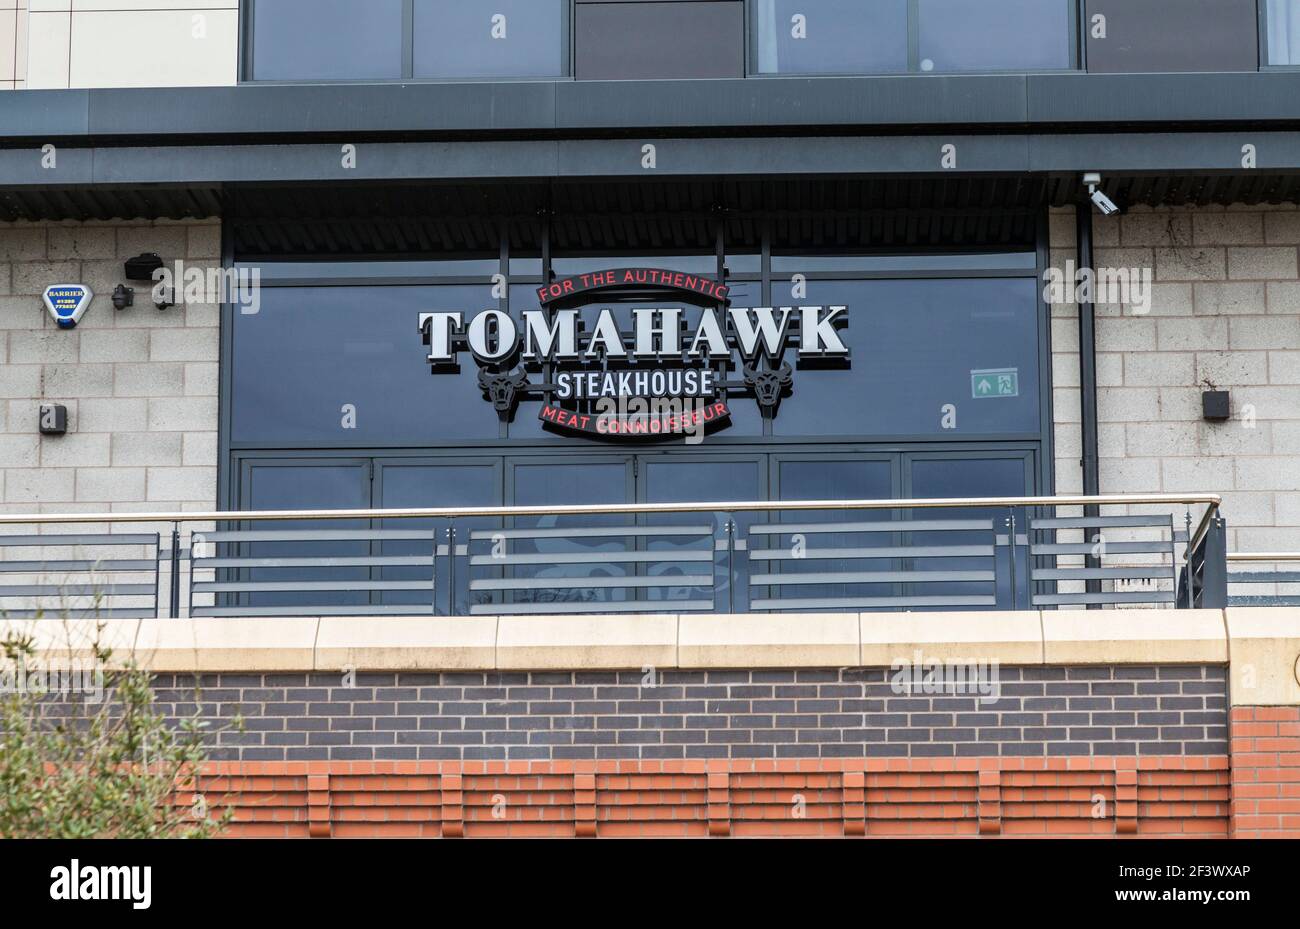 Darlington,UK. 17th March 2021.The Tomahawk Steakhouse restaurant chain which asked furloughed staff to loan it 10% of their wages, amid claims of potential sackings, has paid the money back.David Dixon/ Alamy Stock Photo